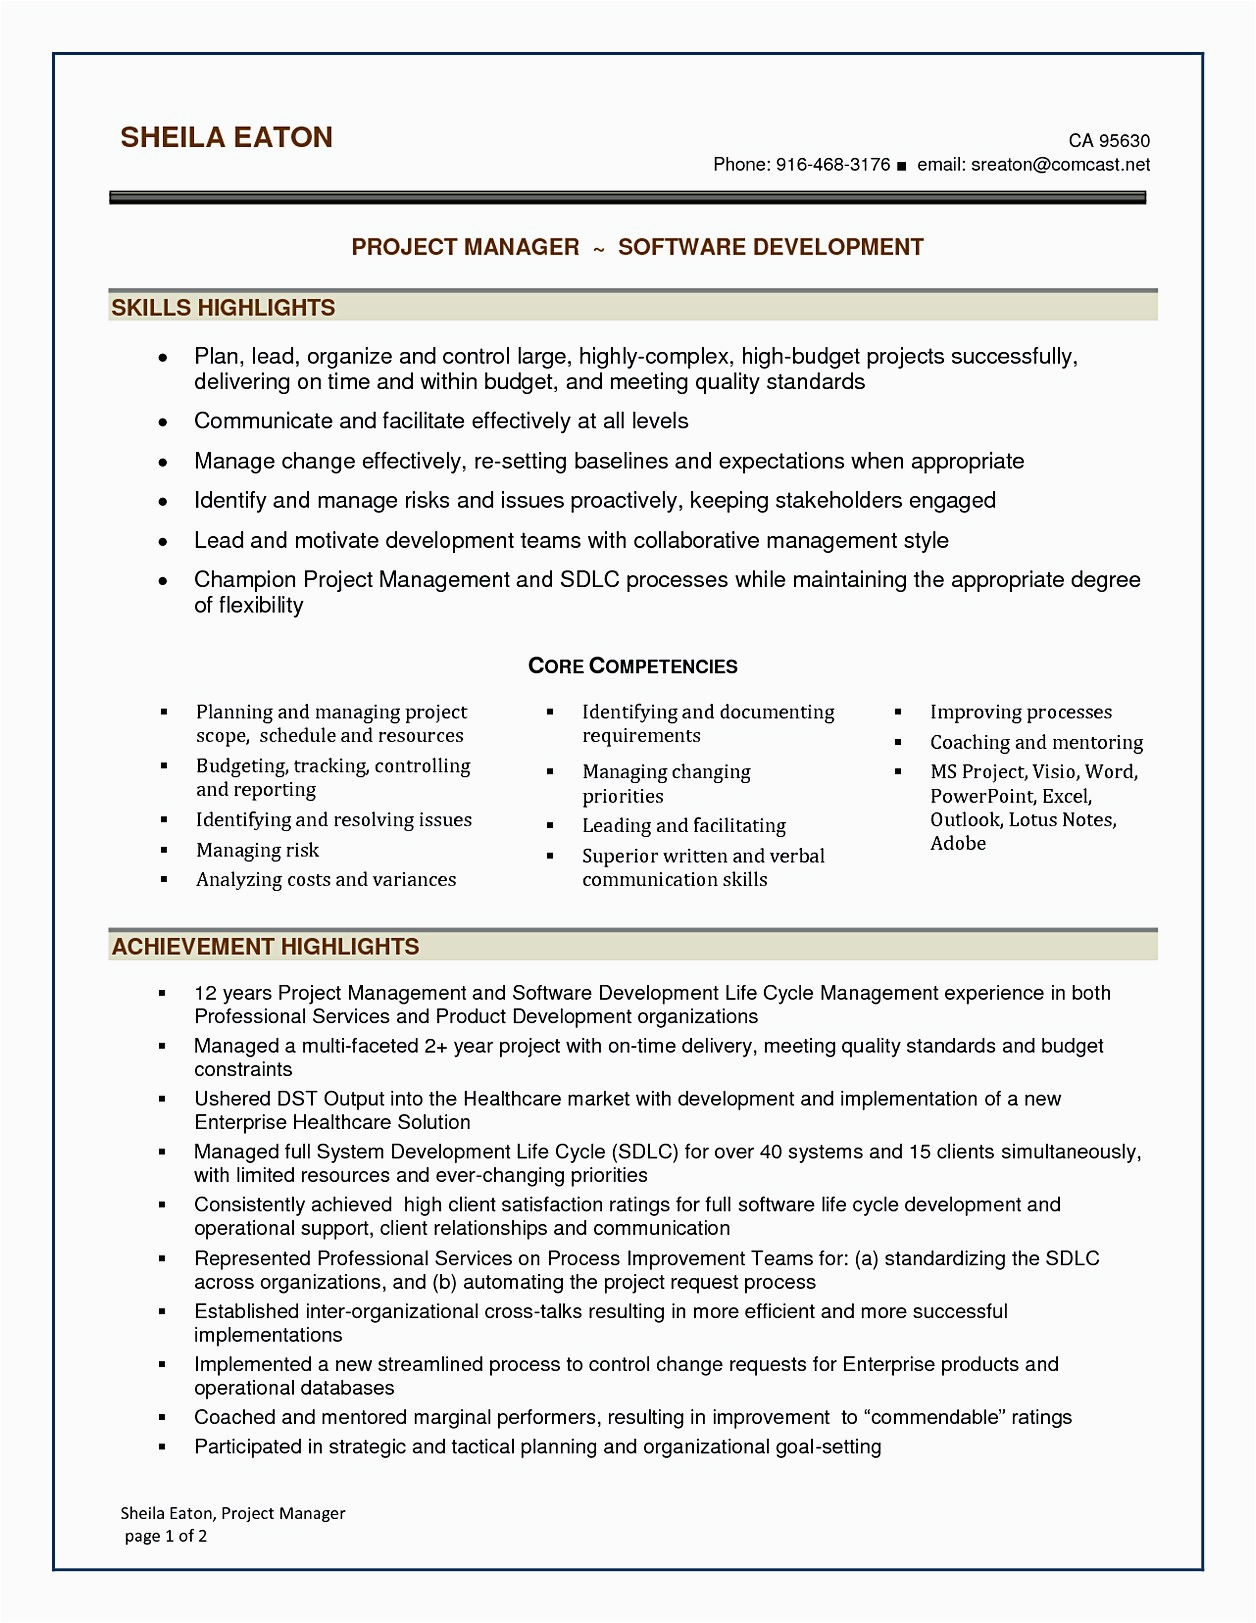 Sample Resume for Project Manager It software India software Project Manager Resume